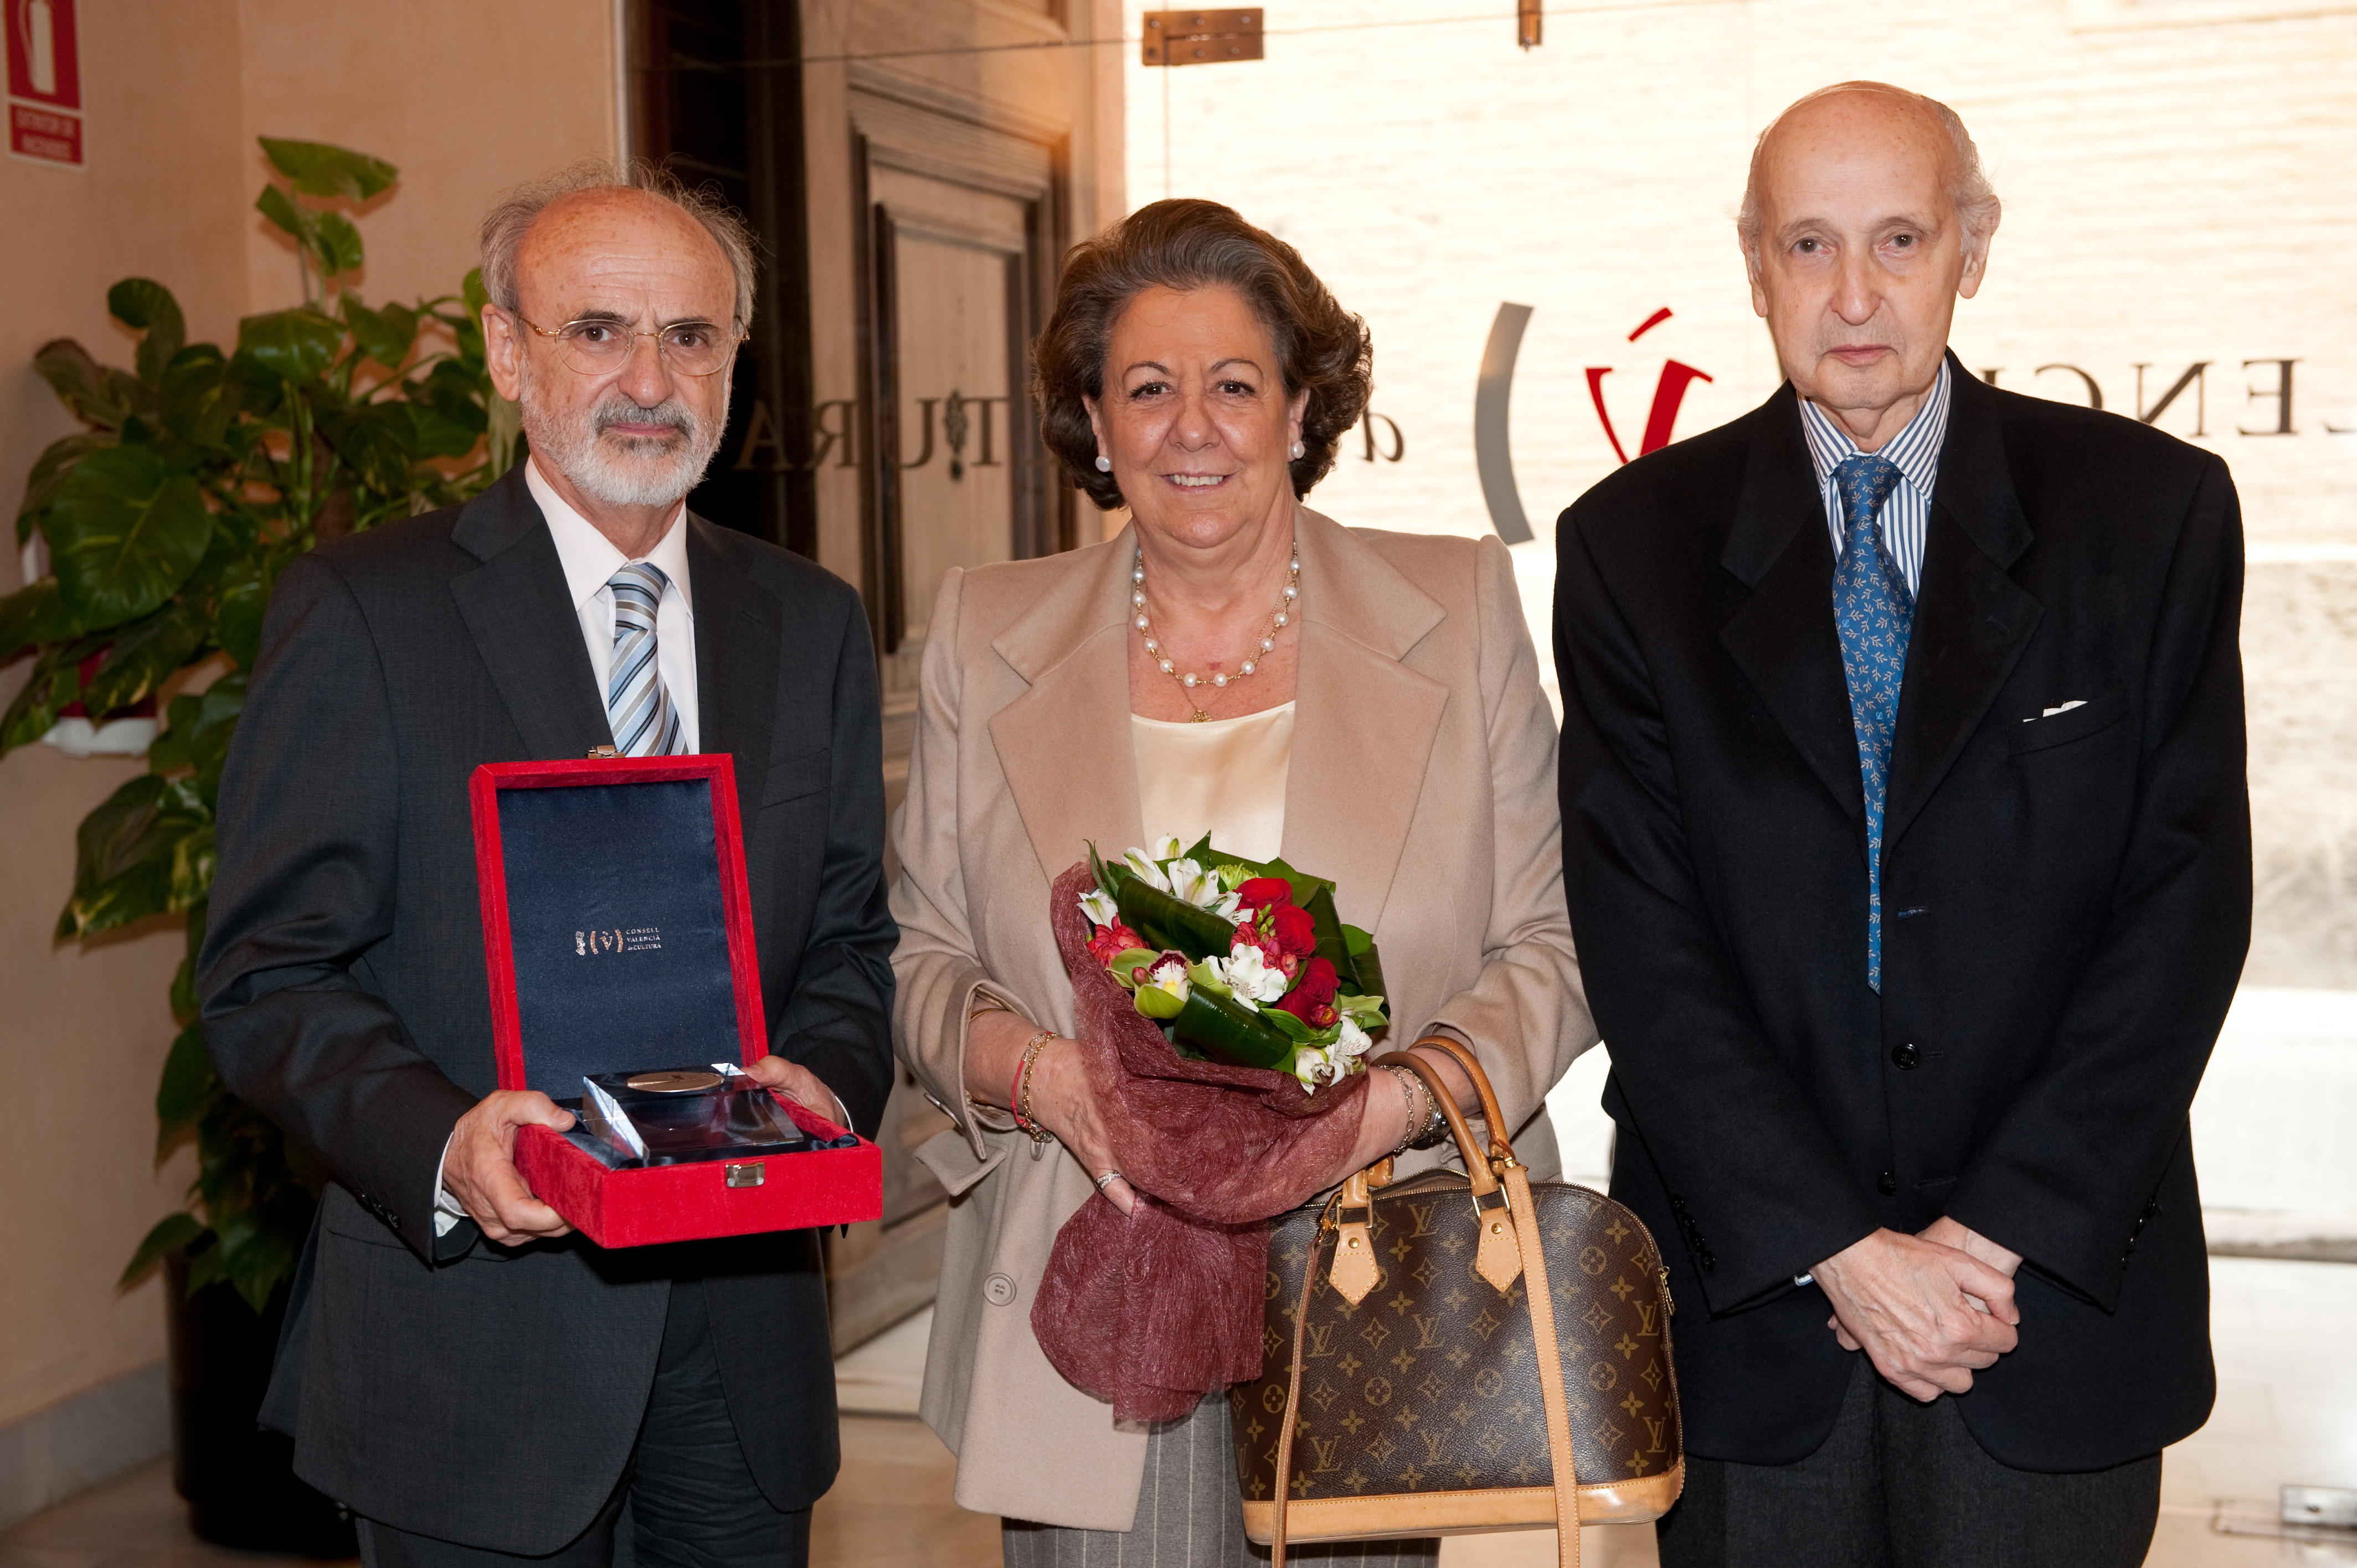 Esther Koplowitz Foundation awarded Valencia Council of Culture medal